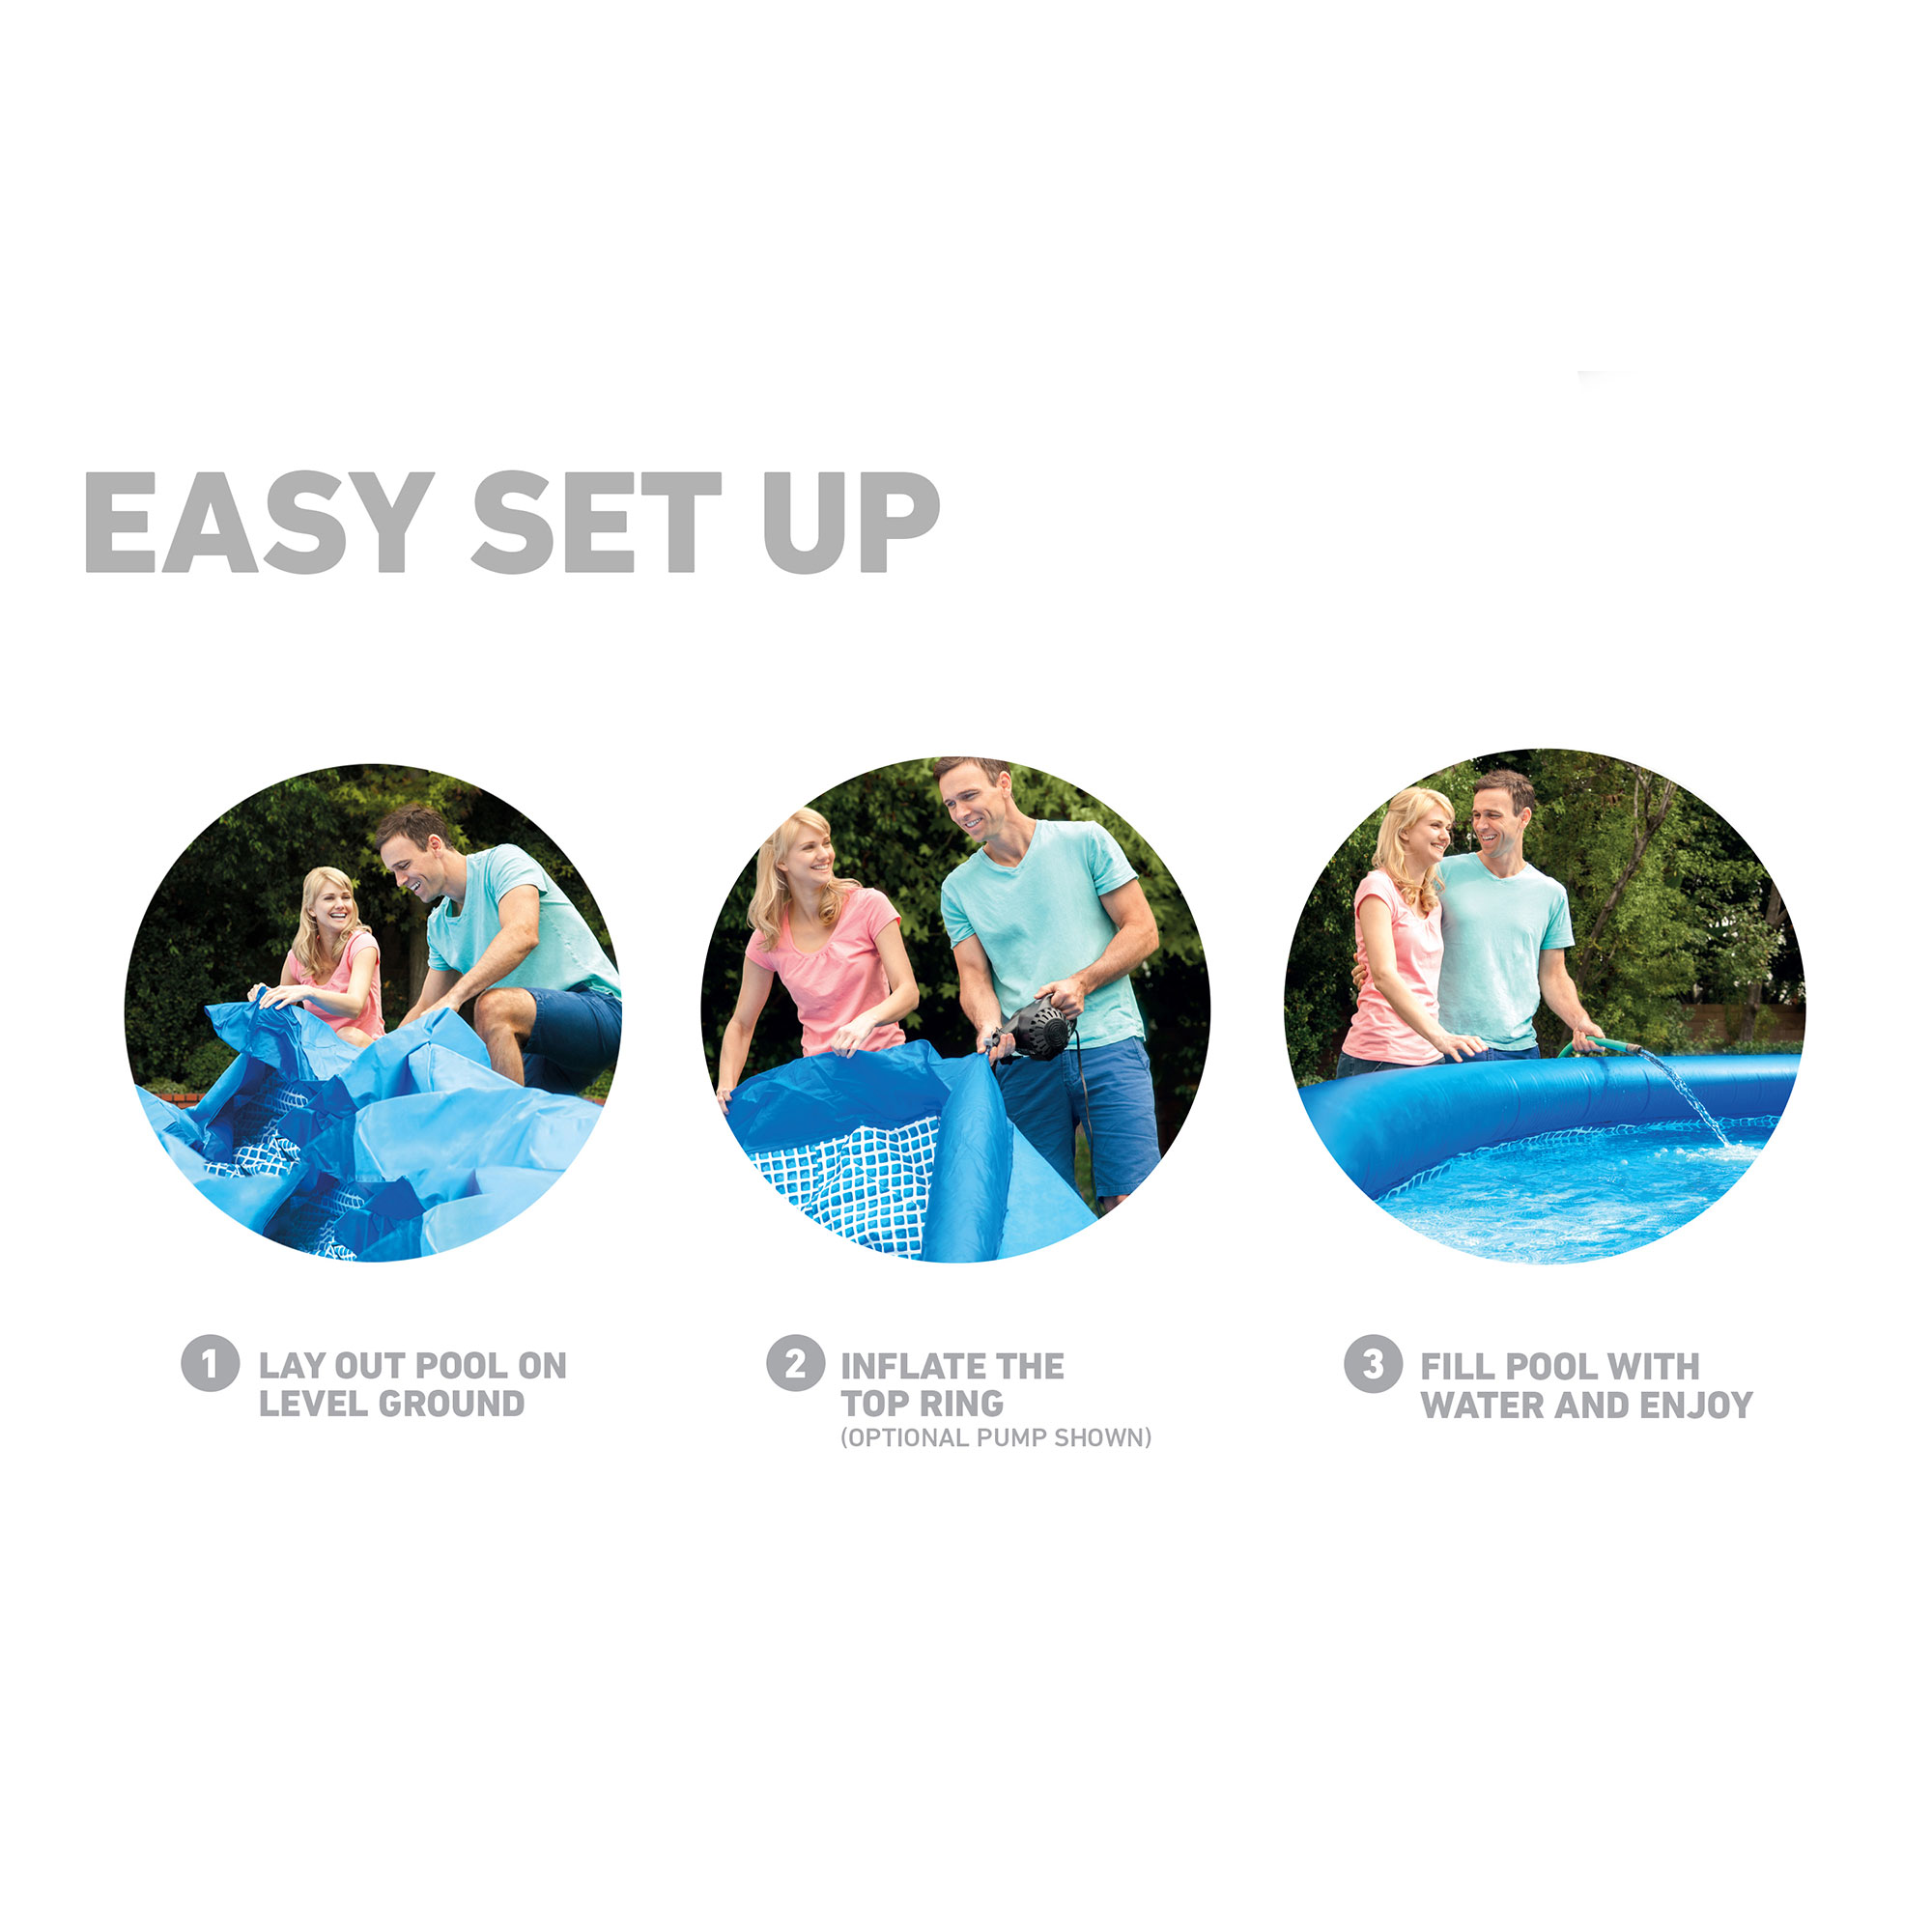 Intex 28116EH Round 10' X 2' Easy Set Inflatable Above Ground Portable Outdoor Pool for Kids and Adults, Blue - image 5 of 9